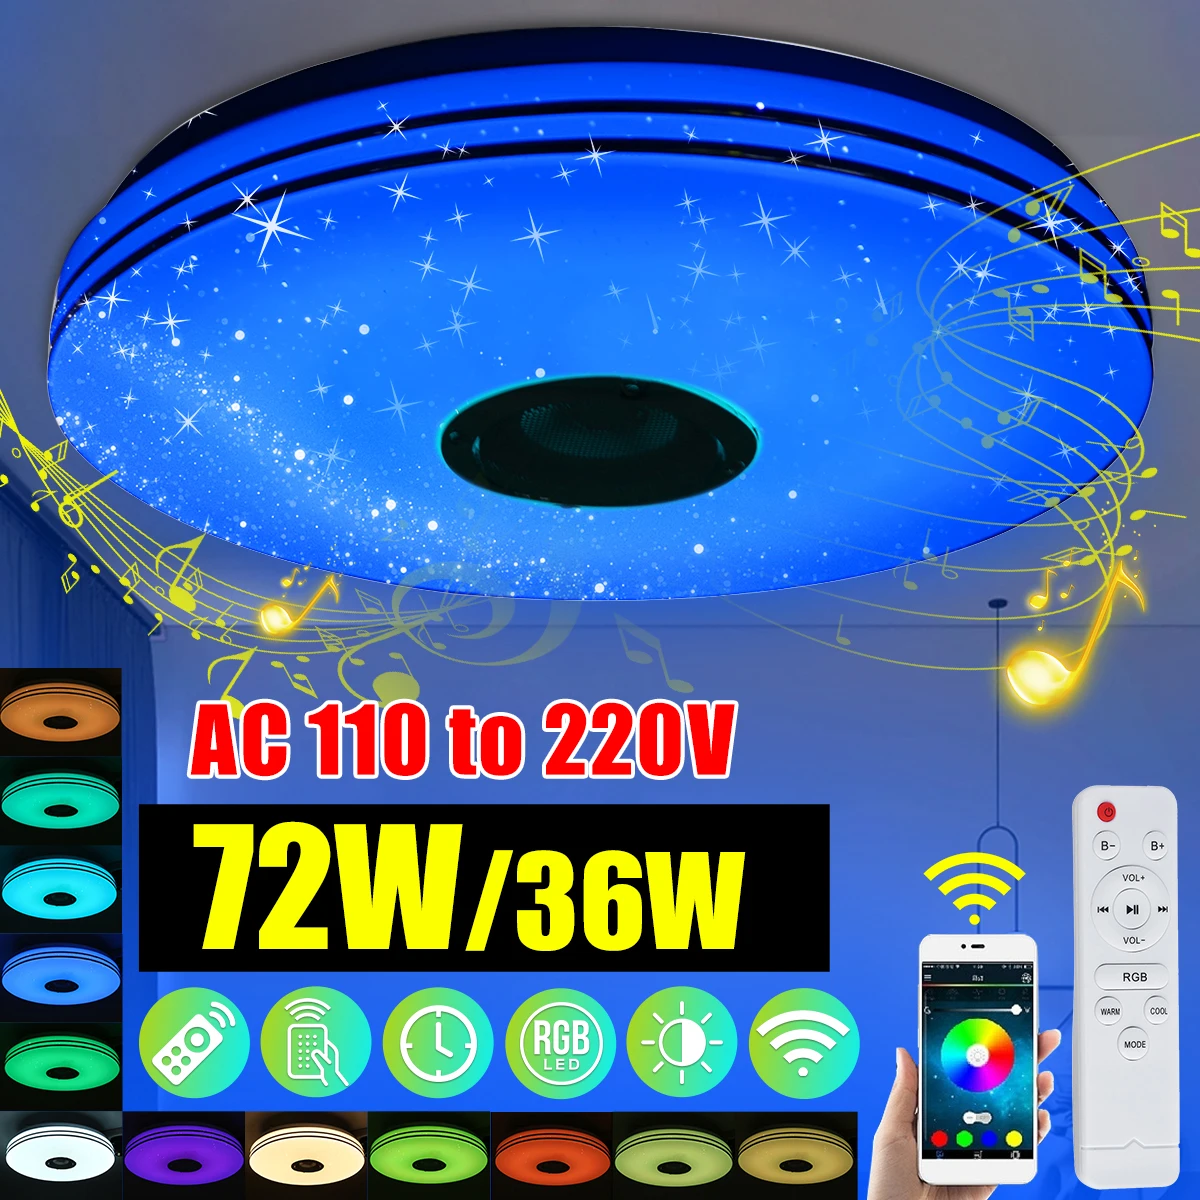 

Modern RGB LED Ceiling Lights Home lighting 36W 72W APP bluetooth Music Light Bedroom Lamps Smart Ceiling Lamp+Remote Control